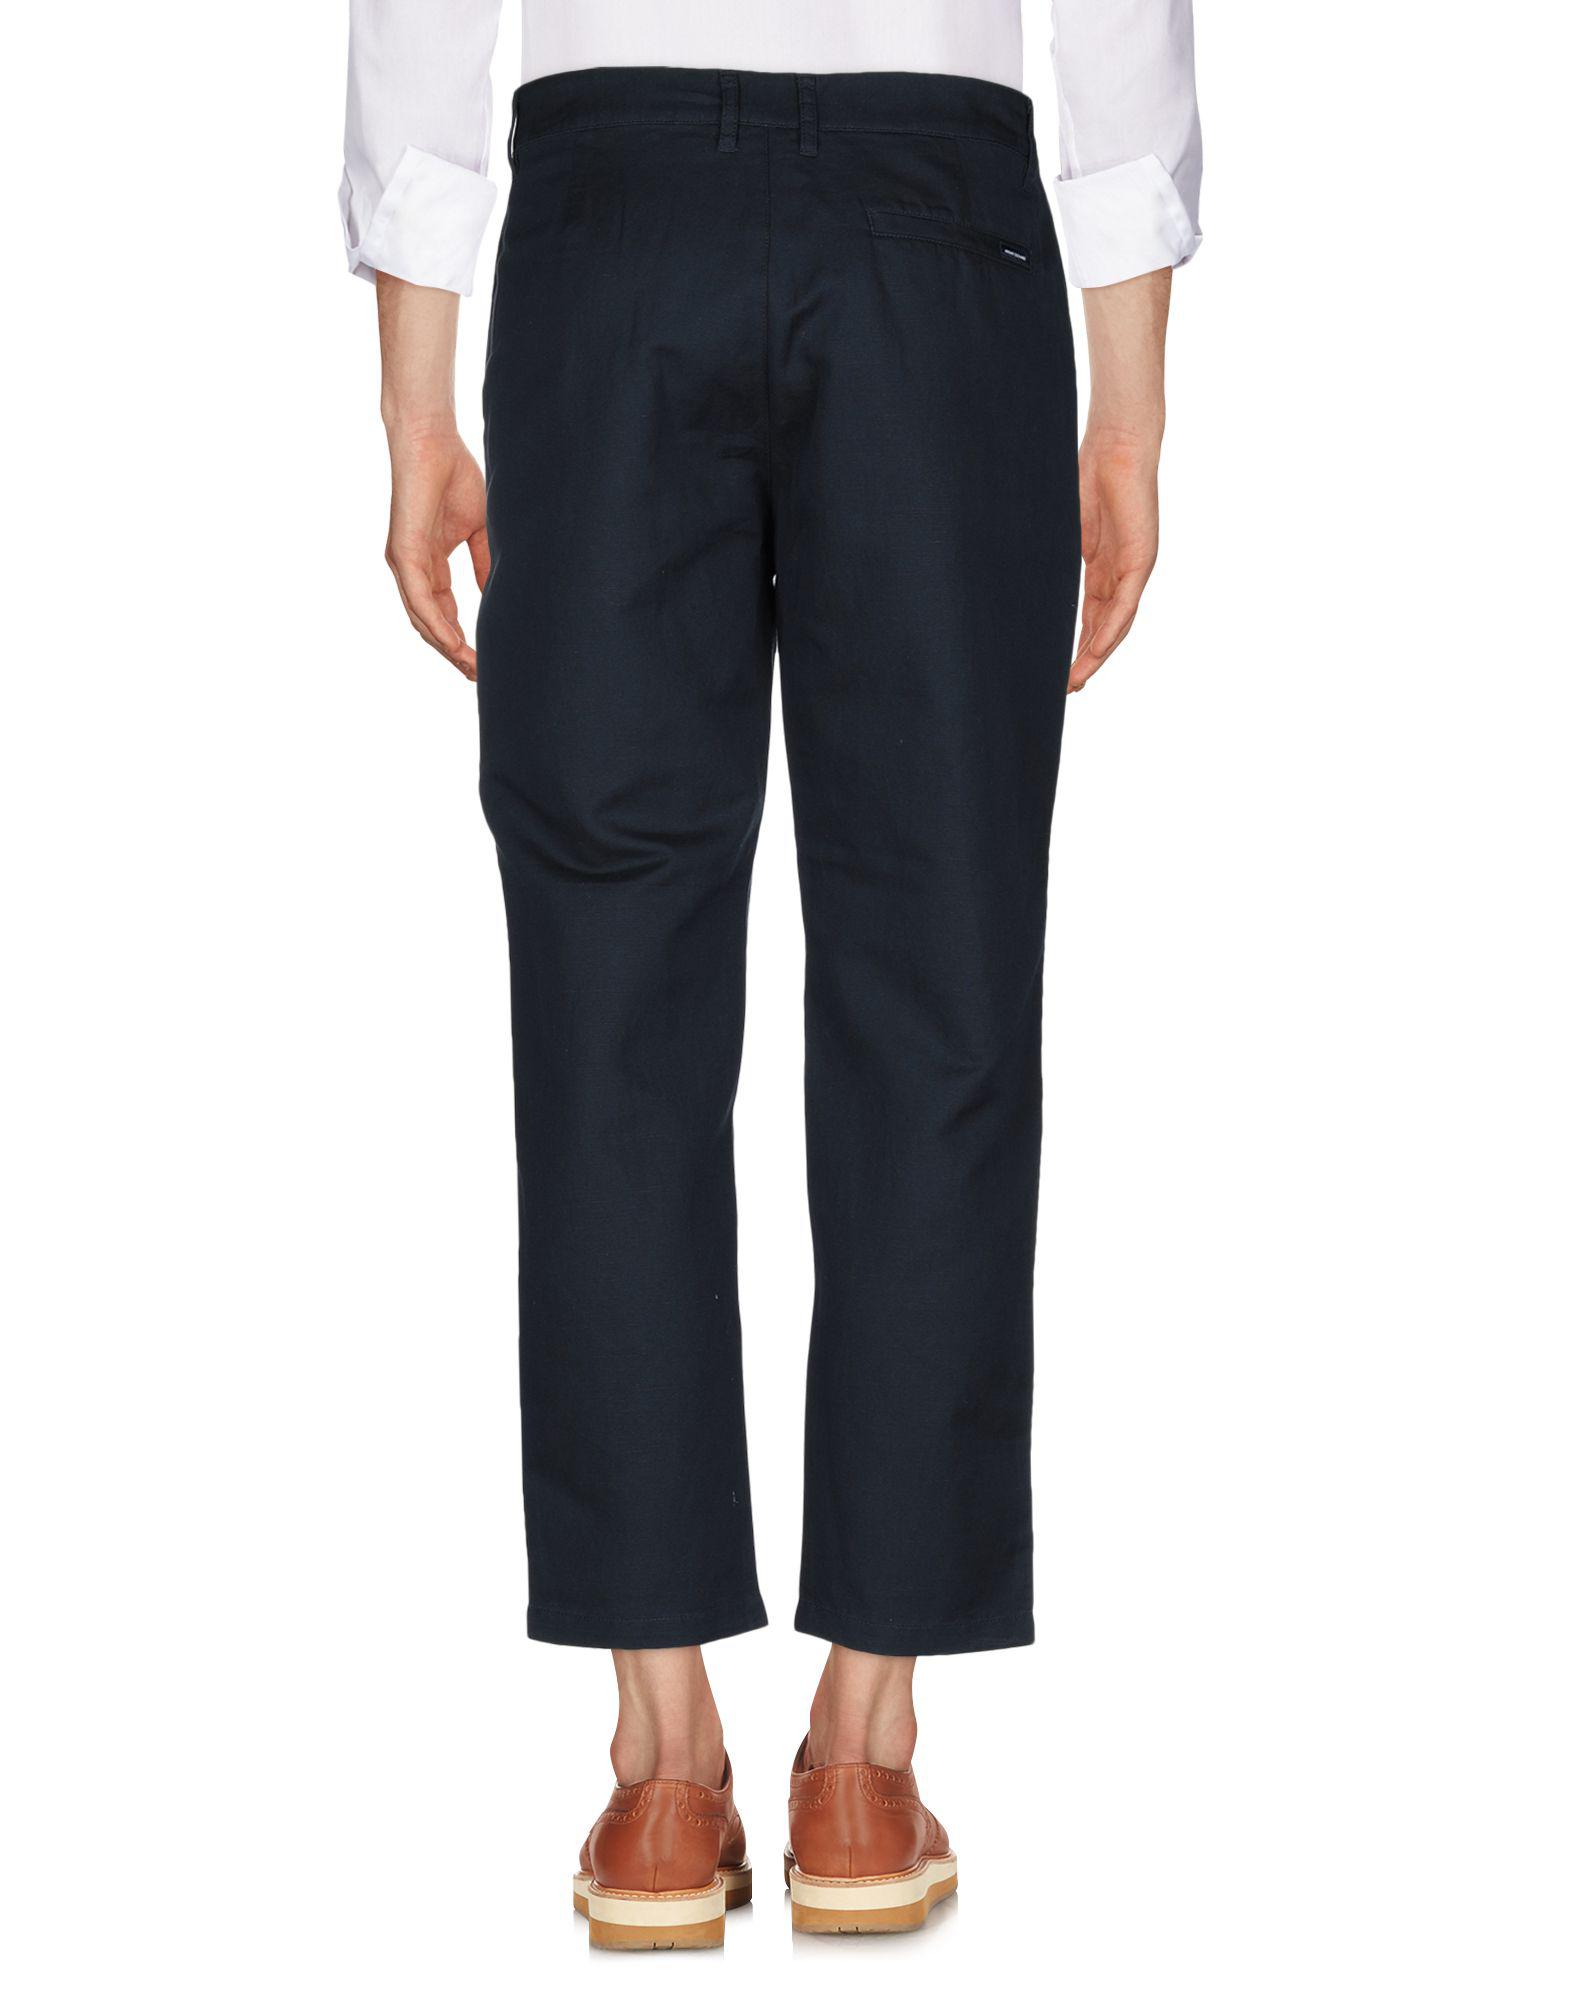 Armani Exchange Casual Trouser in Blue for Men - Lyst